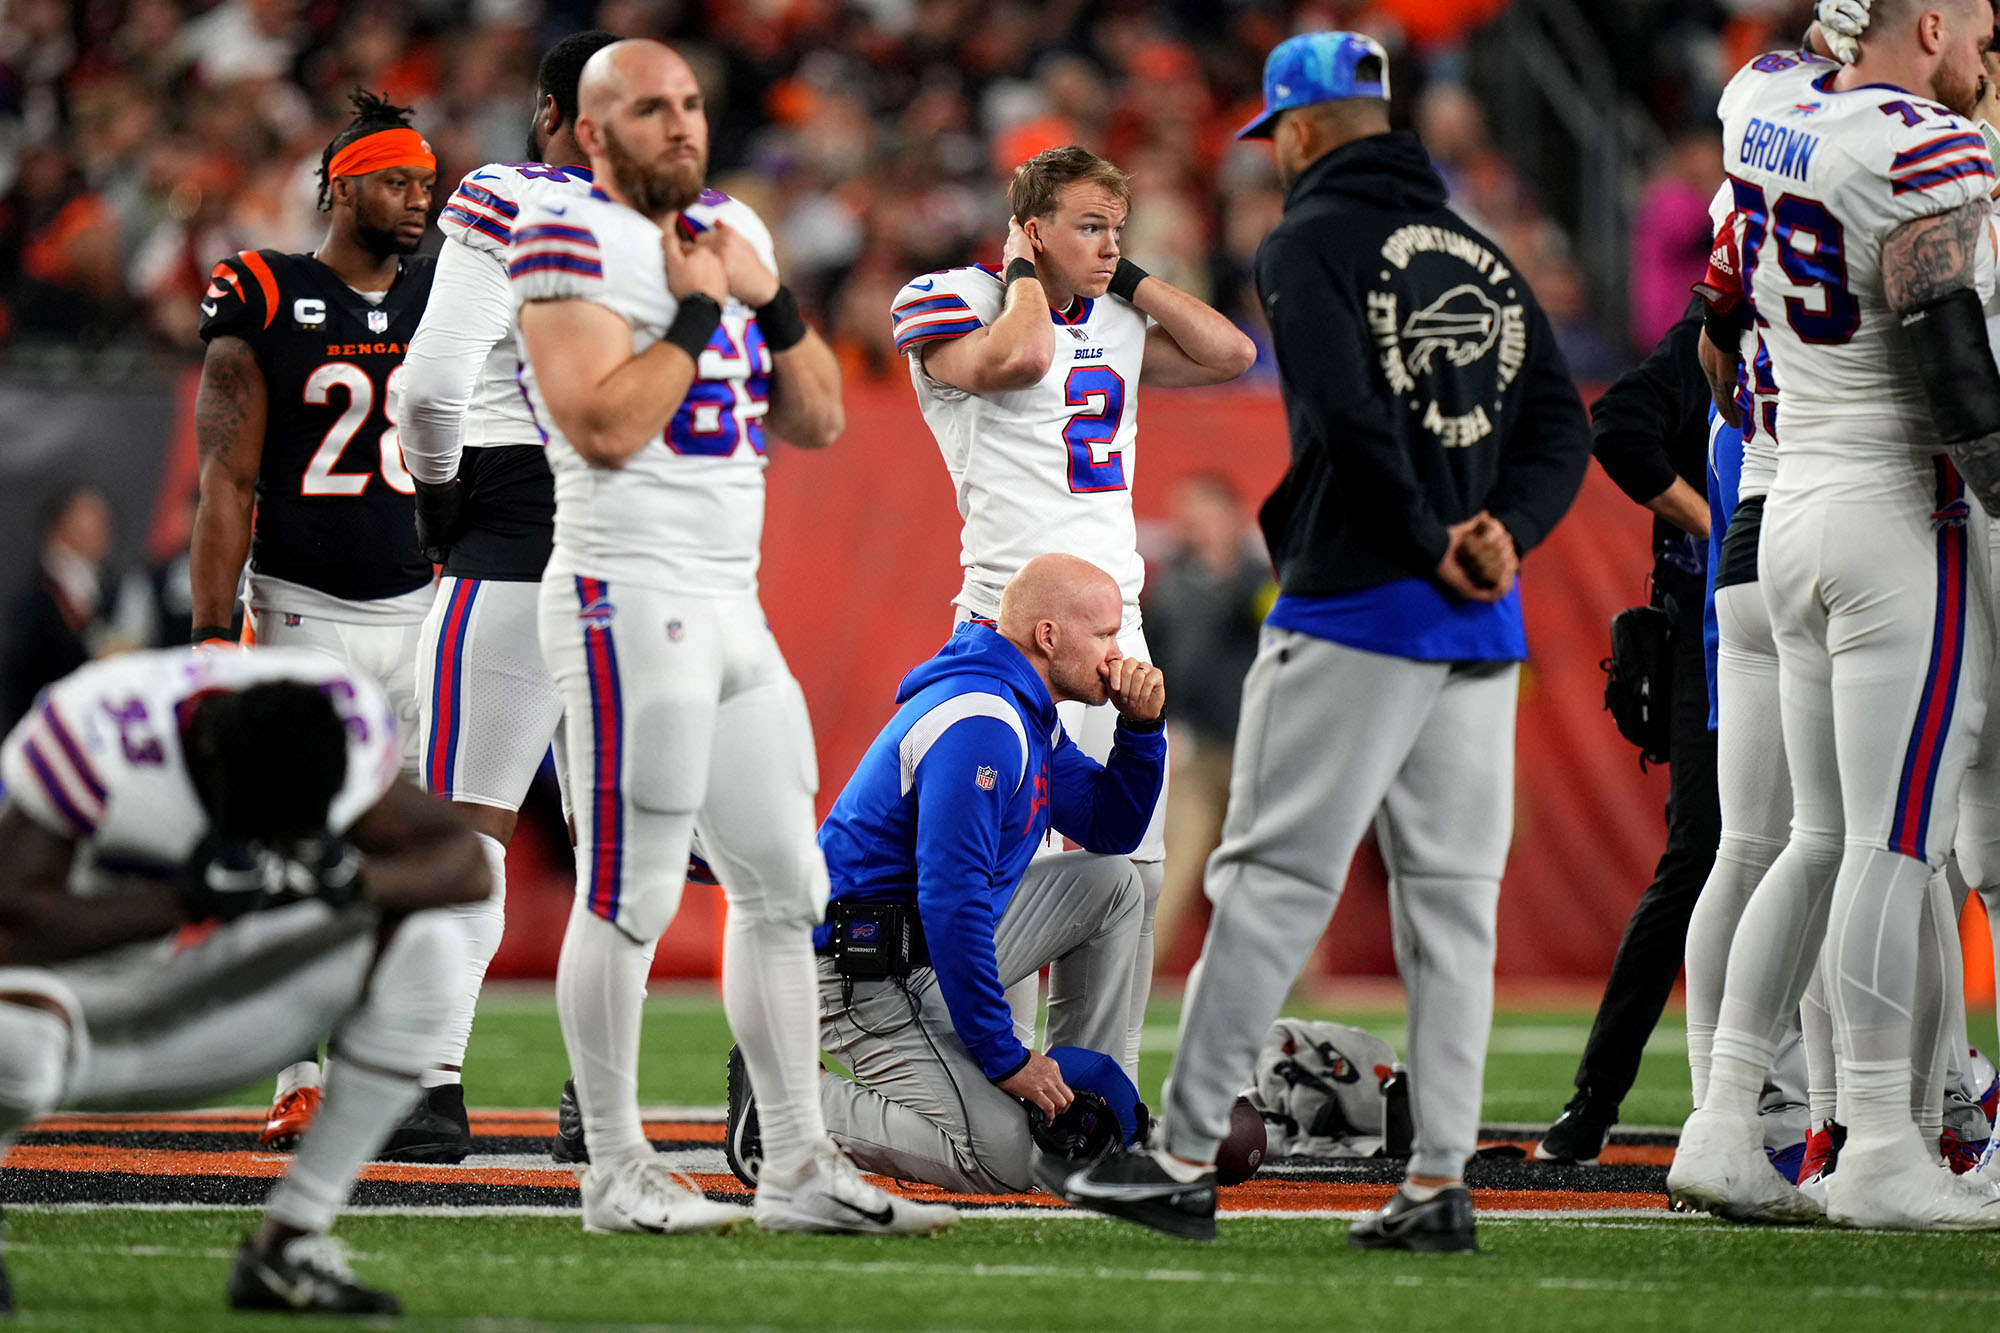 Buffalo Bills head coach Sean McDermott takes a knee as Buffalo Bills safety Damar Hamlin is tended to on the field following a collision in the first quarter against the Cincinnati Bengals at Paycor Stadium on January 2 in Cincinnati, Ohio.